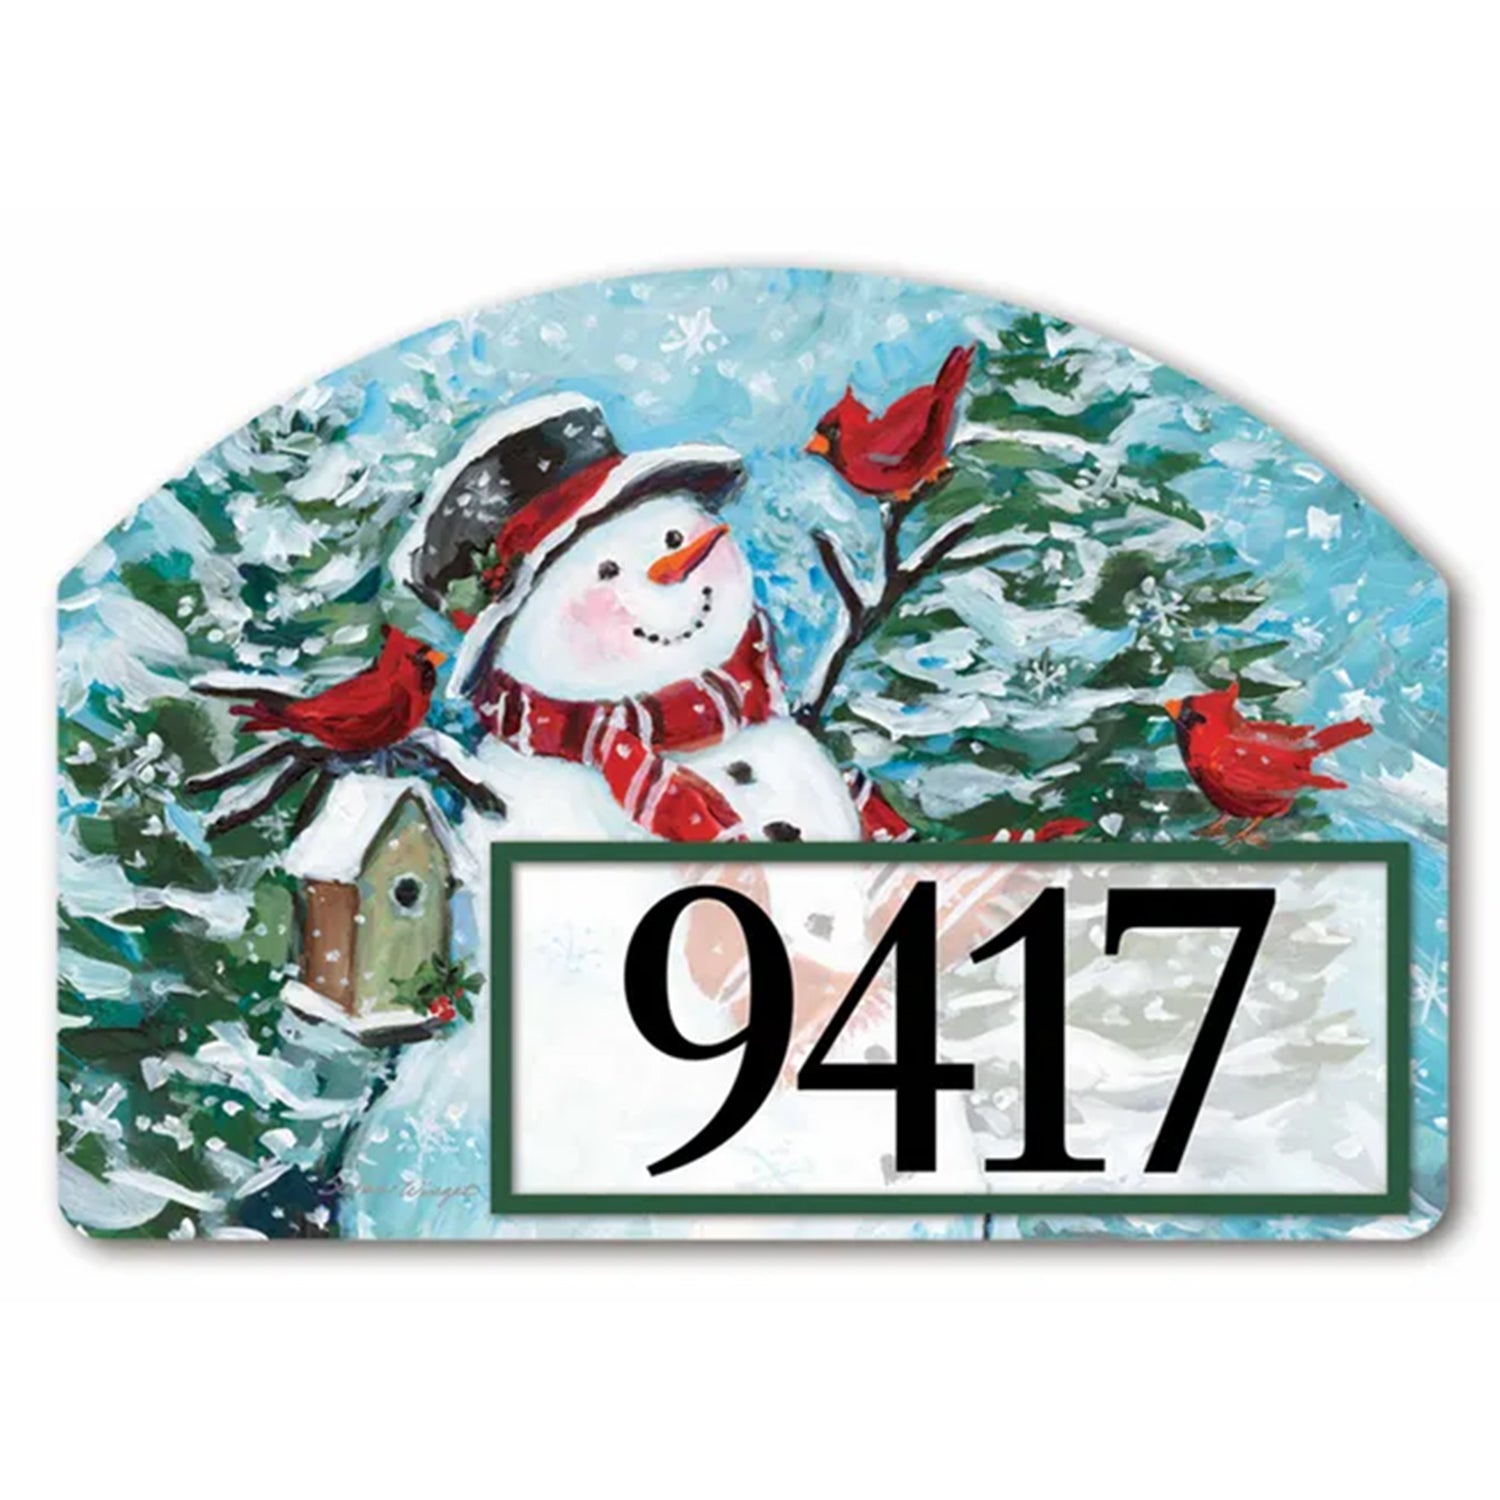 Magnet Works Yard DeSign - Snowman with Cardinals